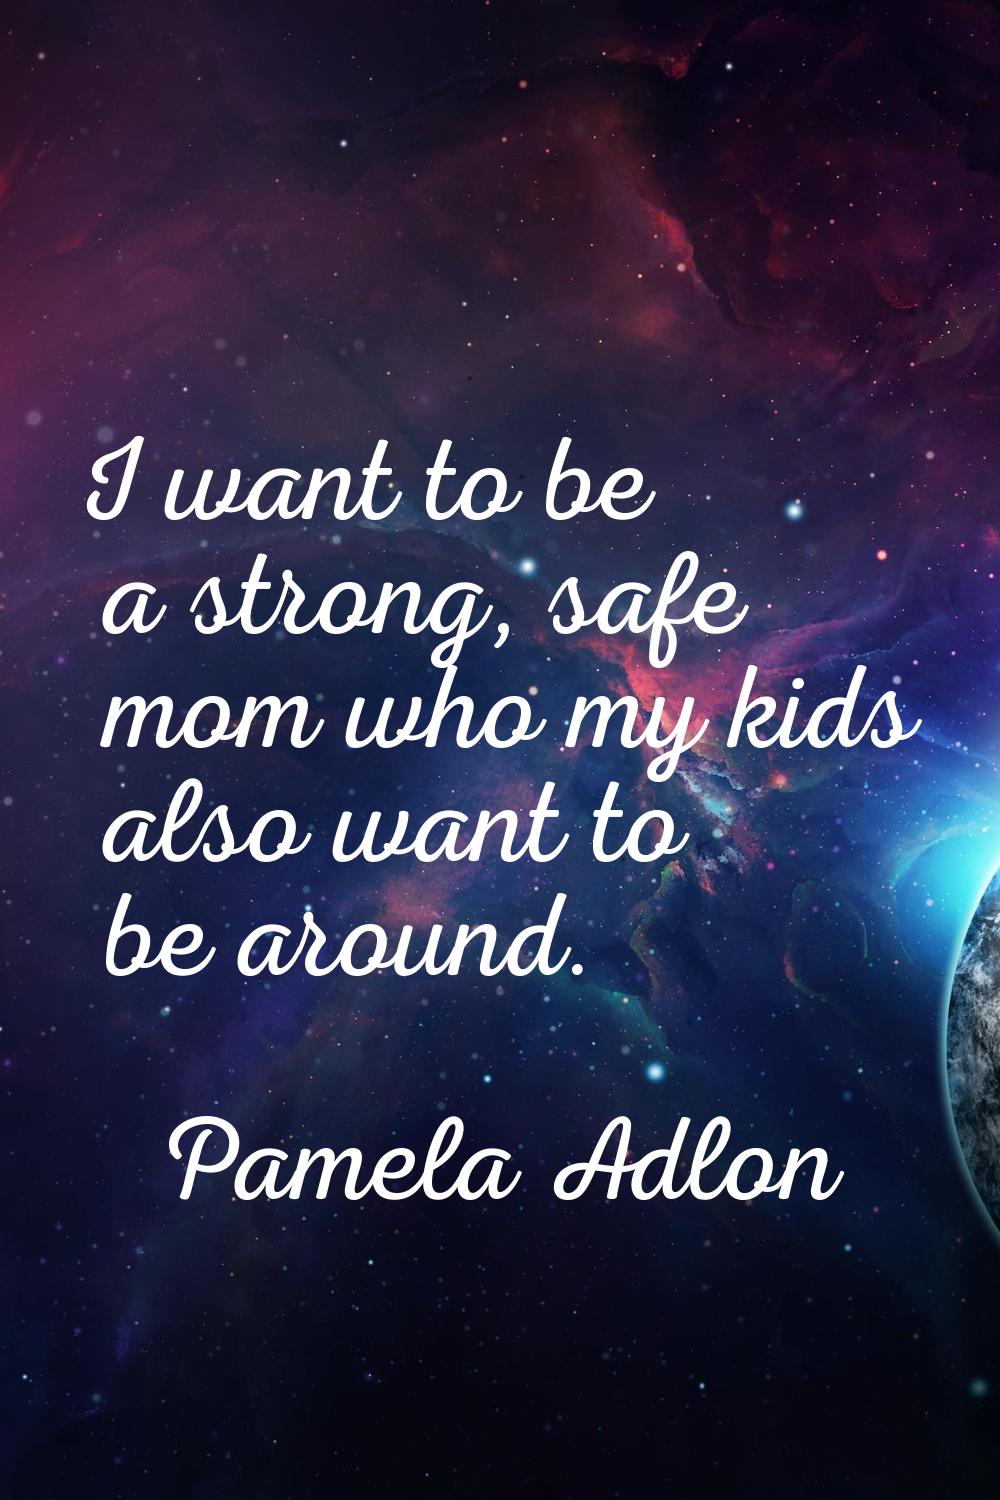 I want to be a strong, safe mom who my kids also want to be around.